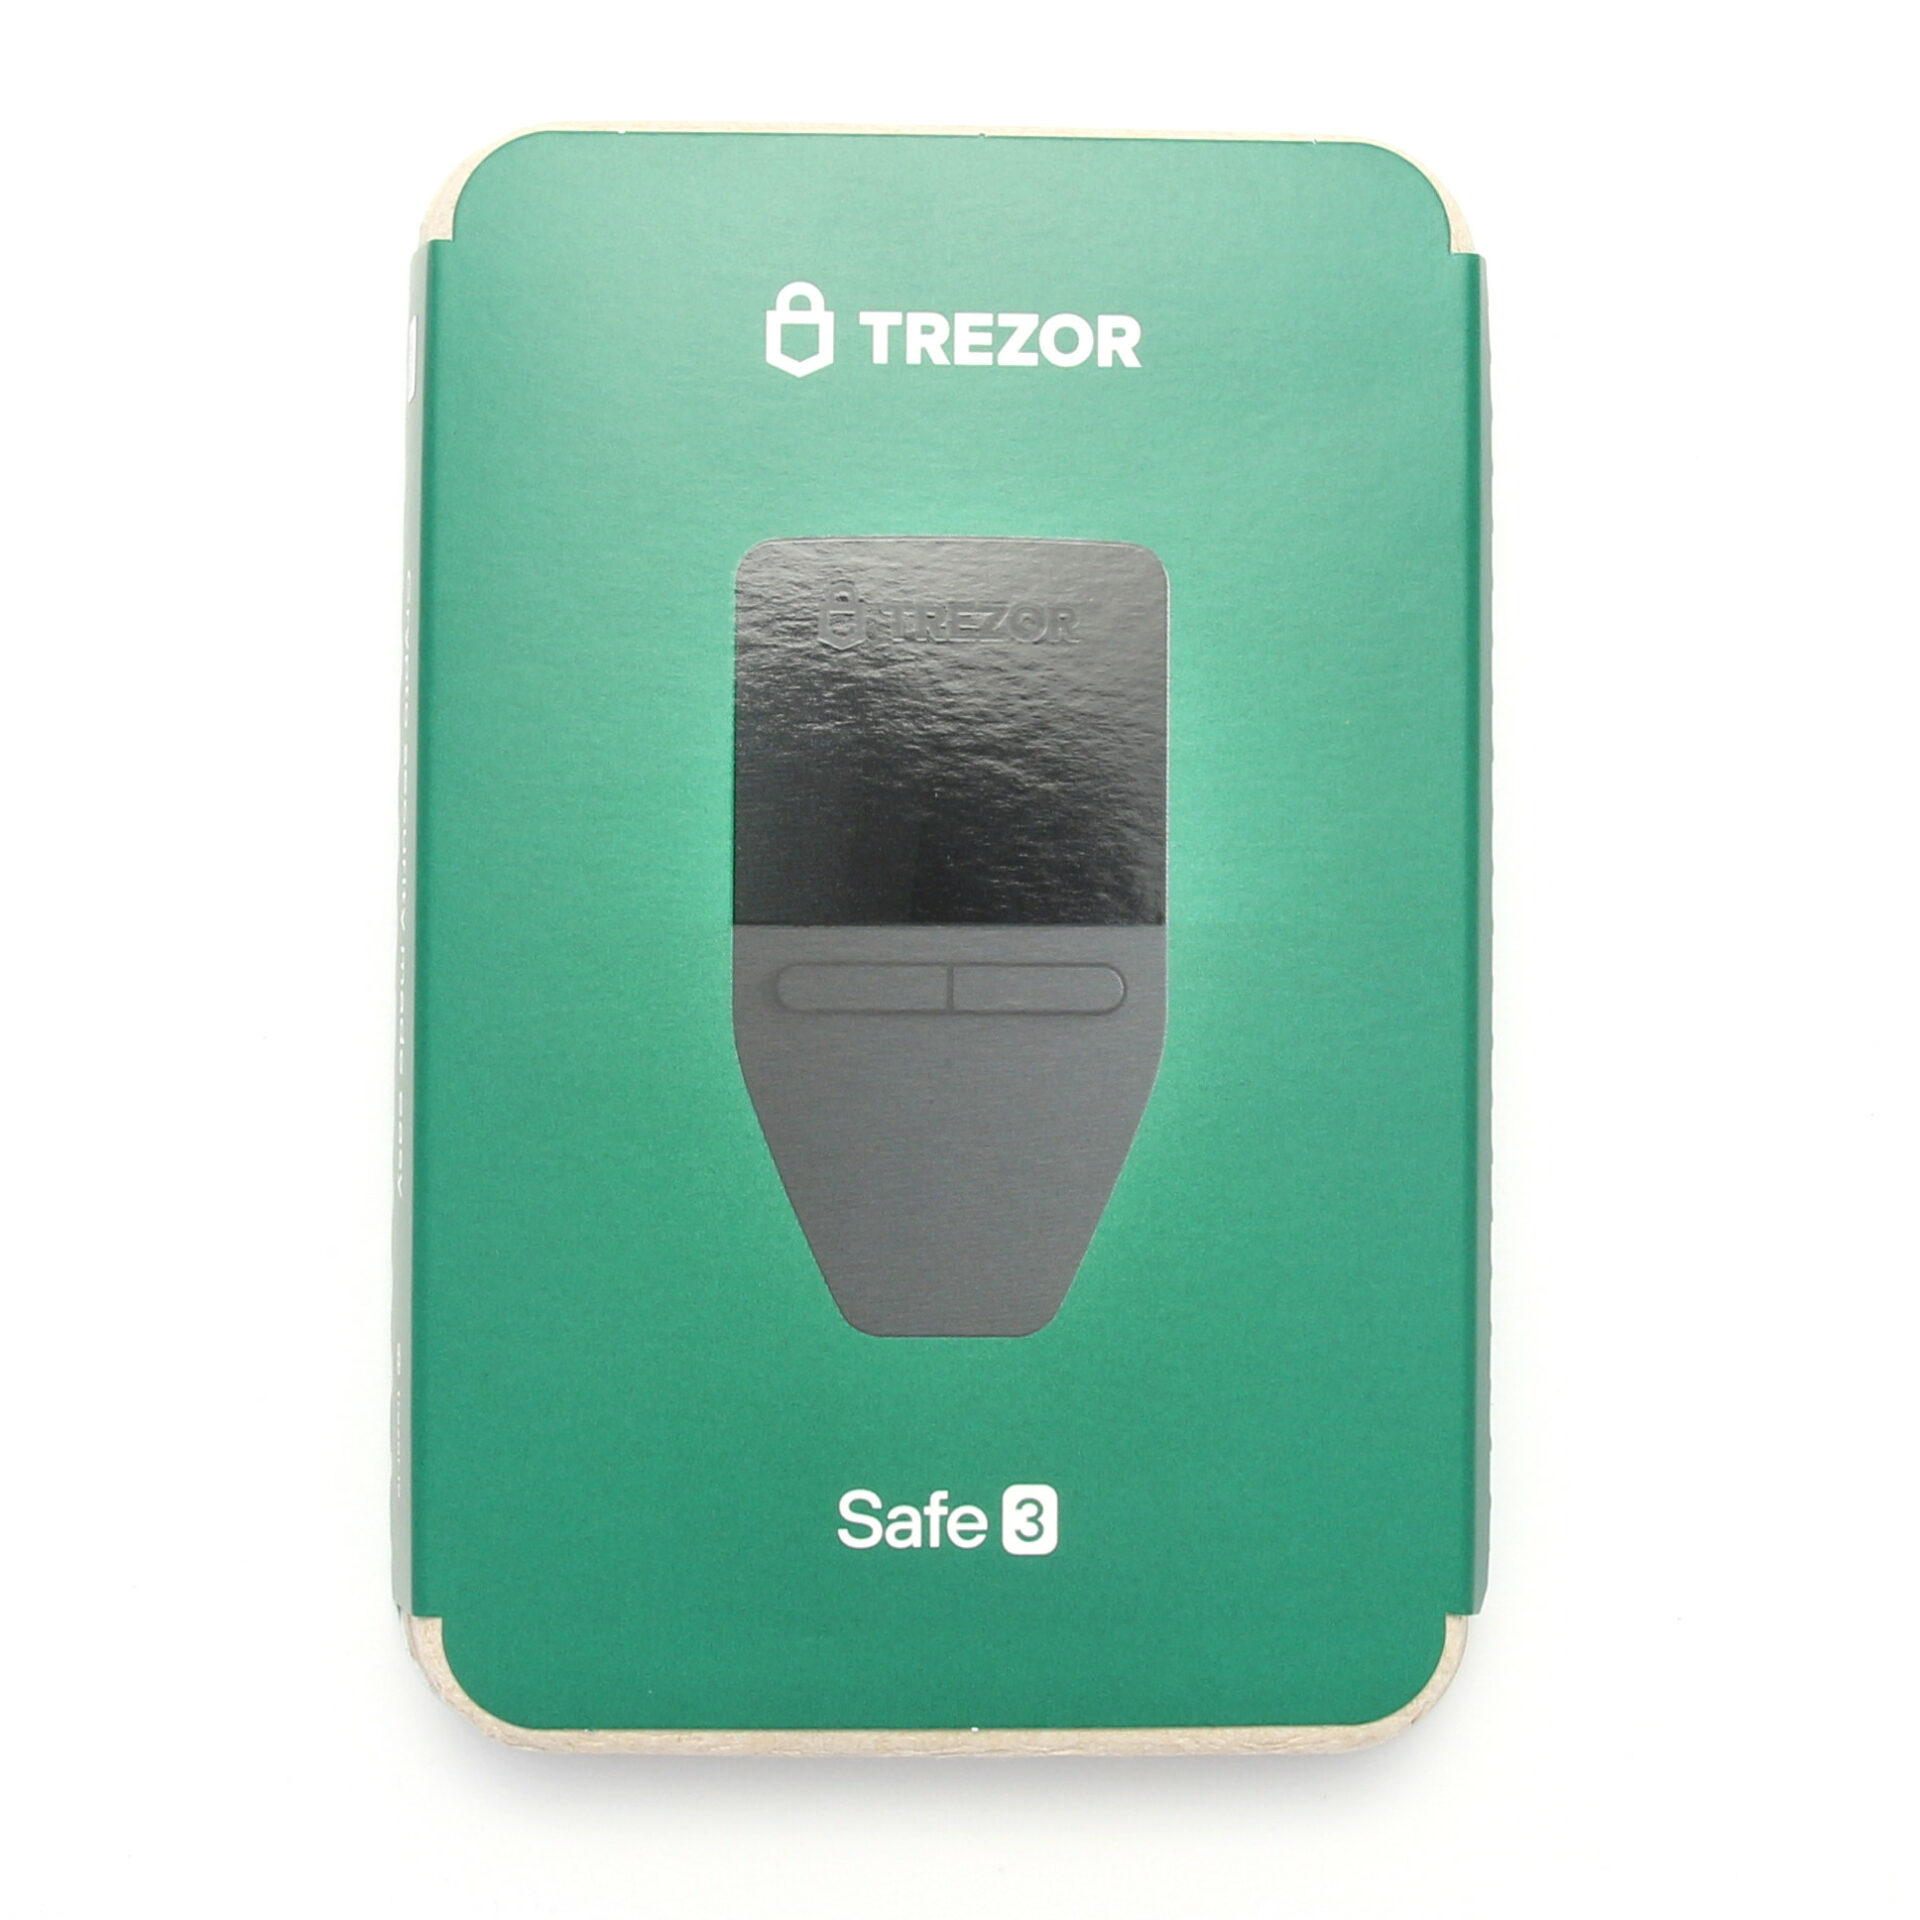 Trezor Model T wallet now supports Cardano, Stellar, Ripple, Decred and more – CryptoNinjas